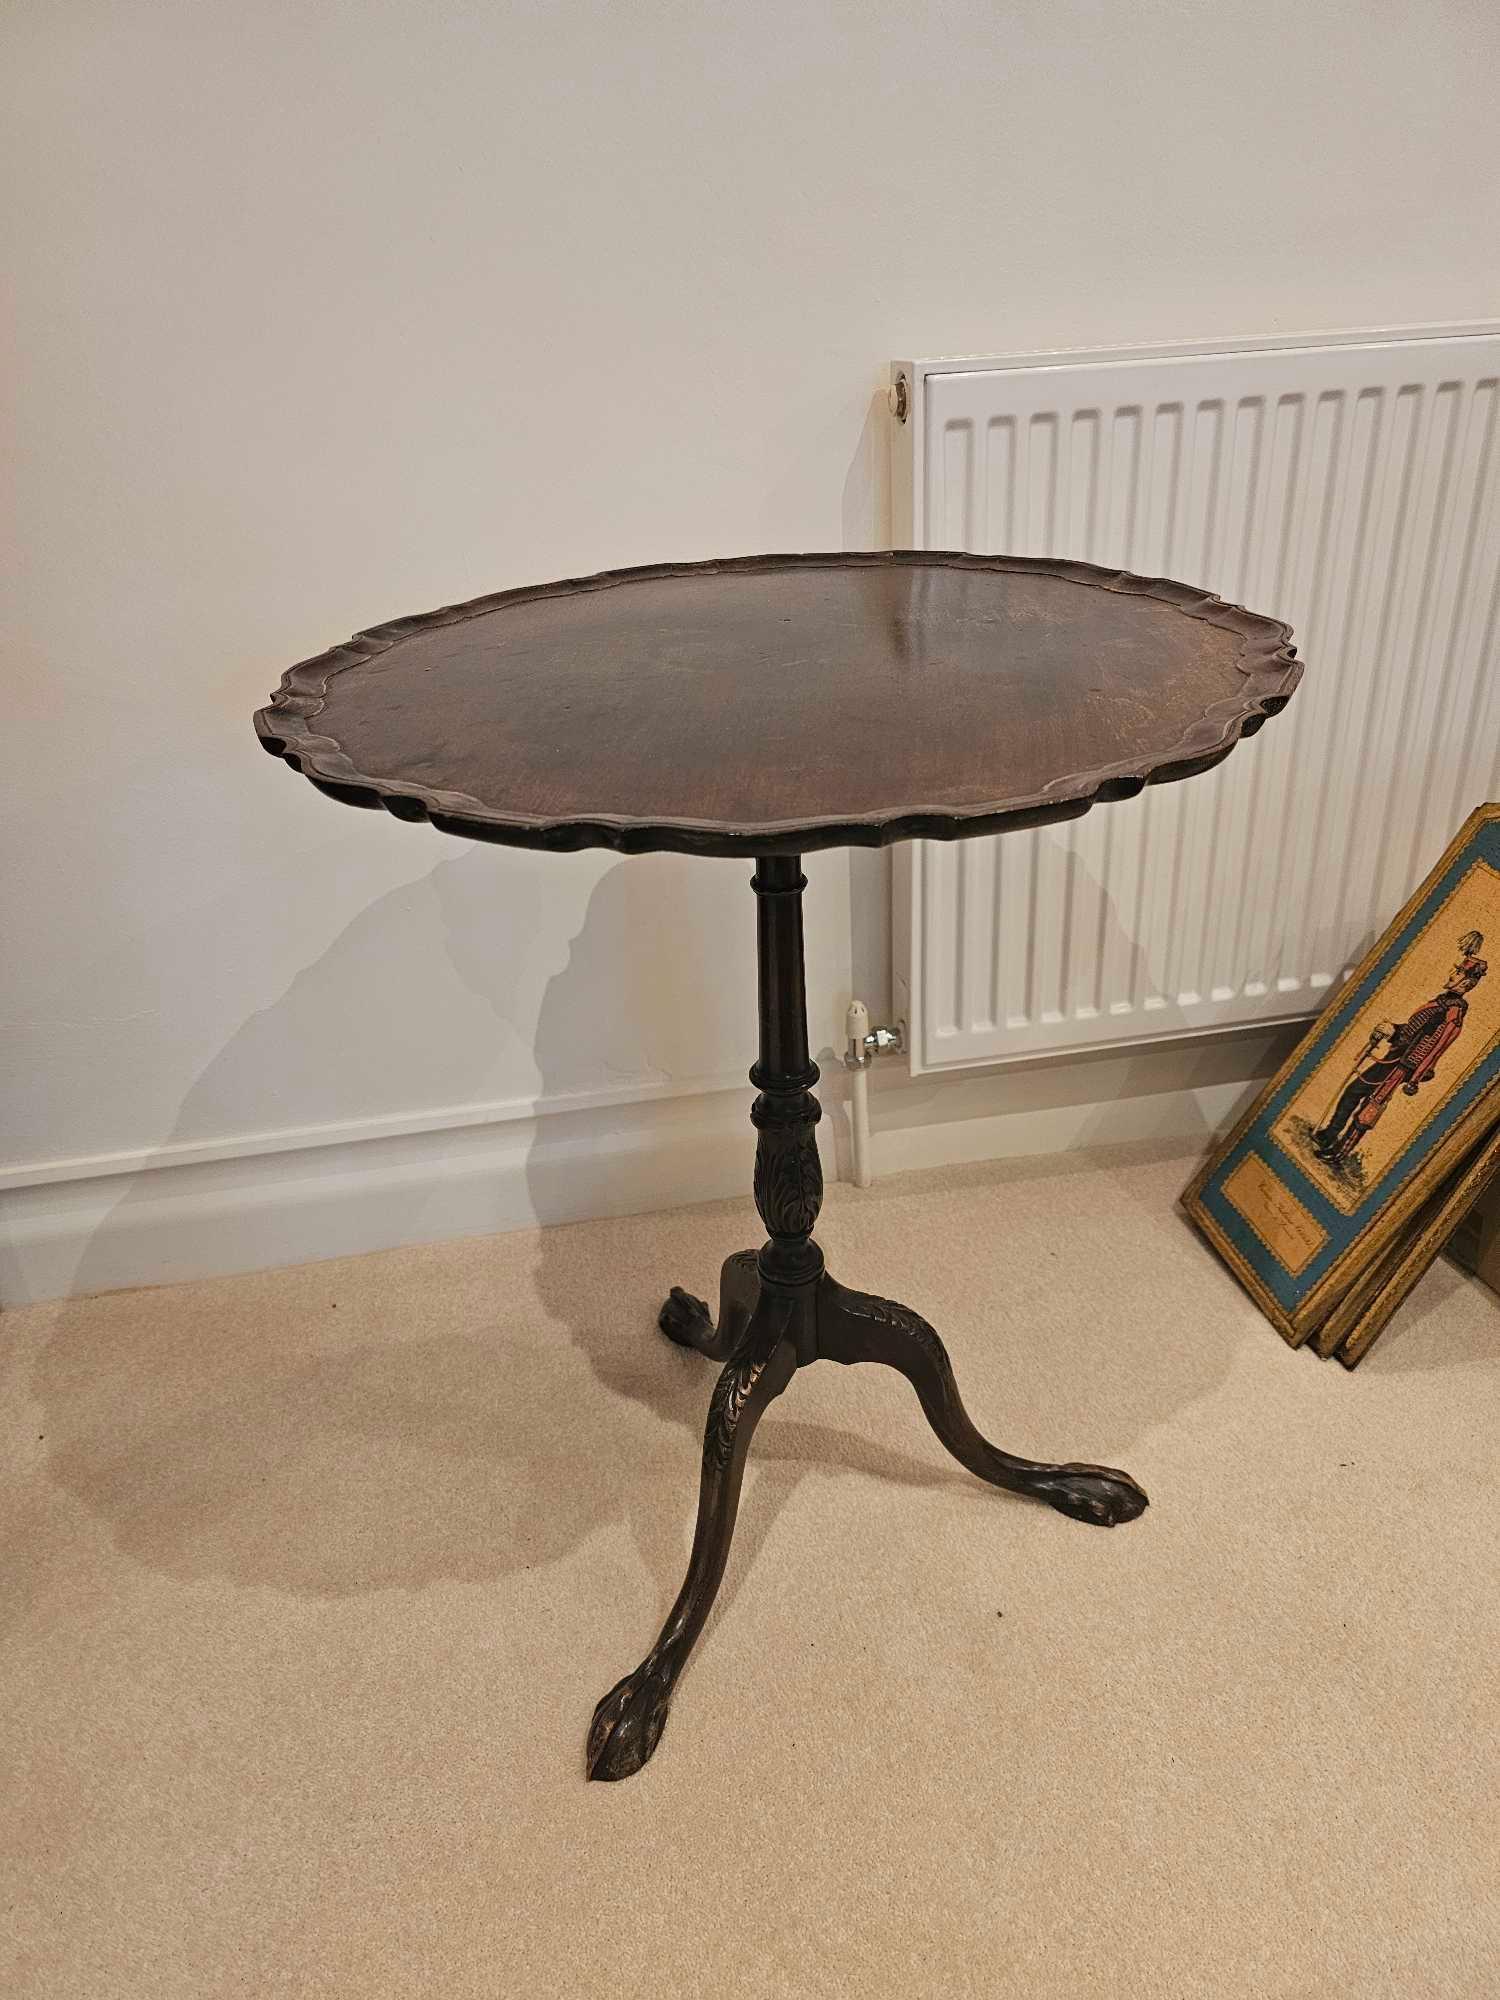 Chippendale Style Mahogany Tilt Top Table A Shaped Pie Crust Edge And Sits On A Well Turned Baluster - Image 4 of 7